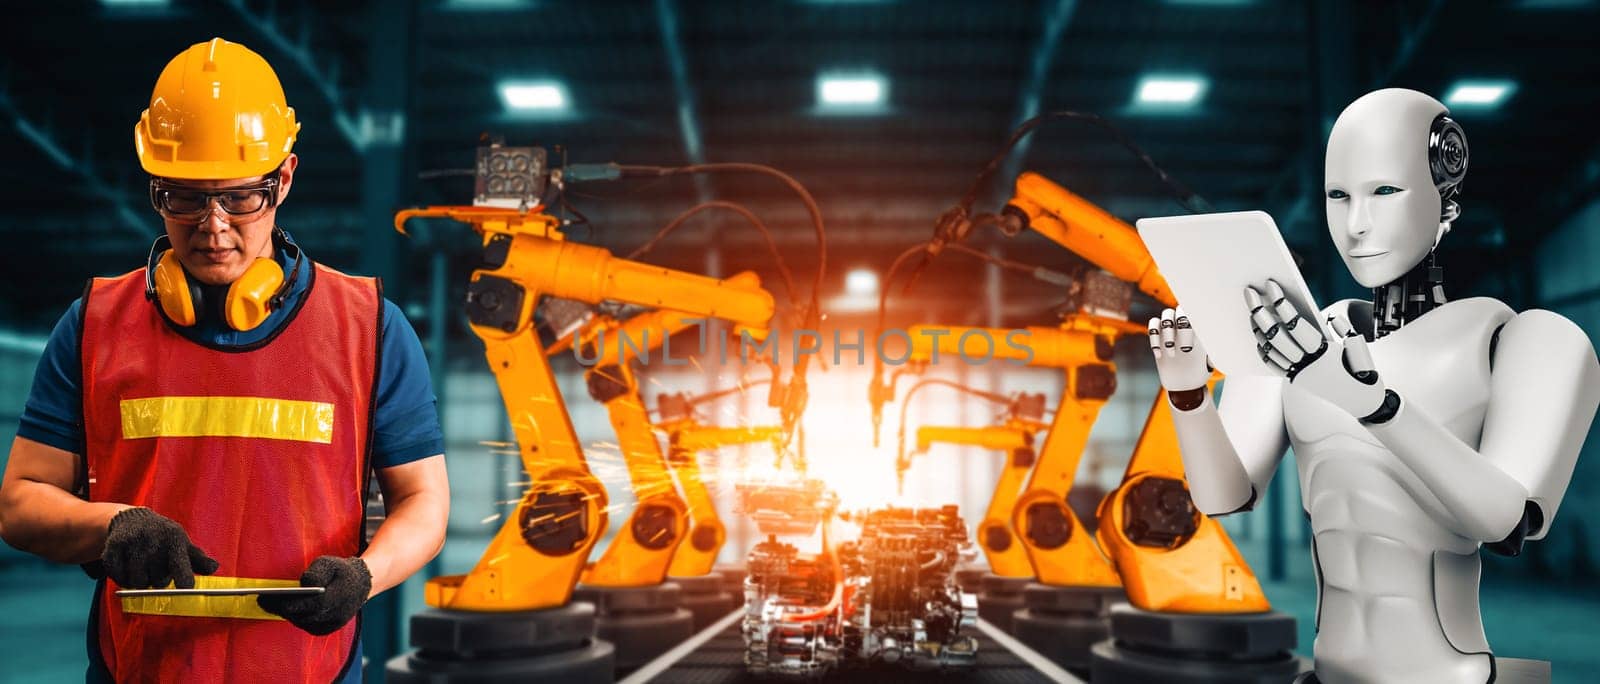 MLB Mechanized industry robot and human worker working together in future factory. Concept of artificial intelligence for industrial revolution and automation manufacturing process.